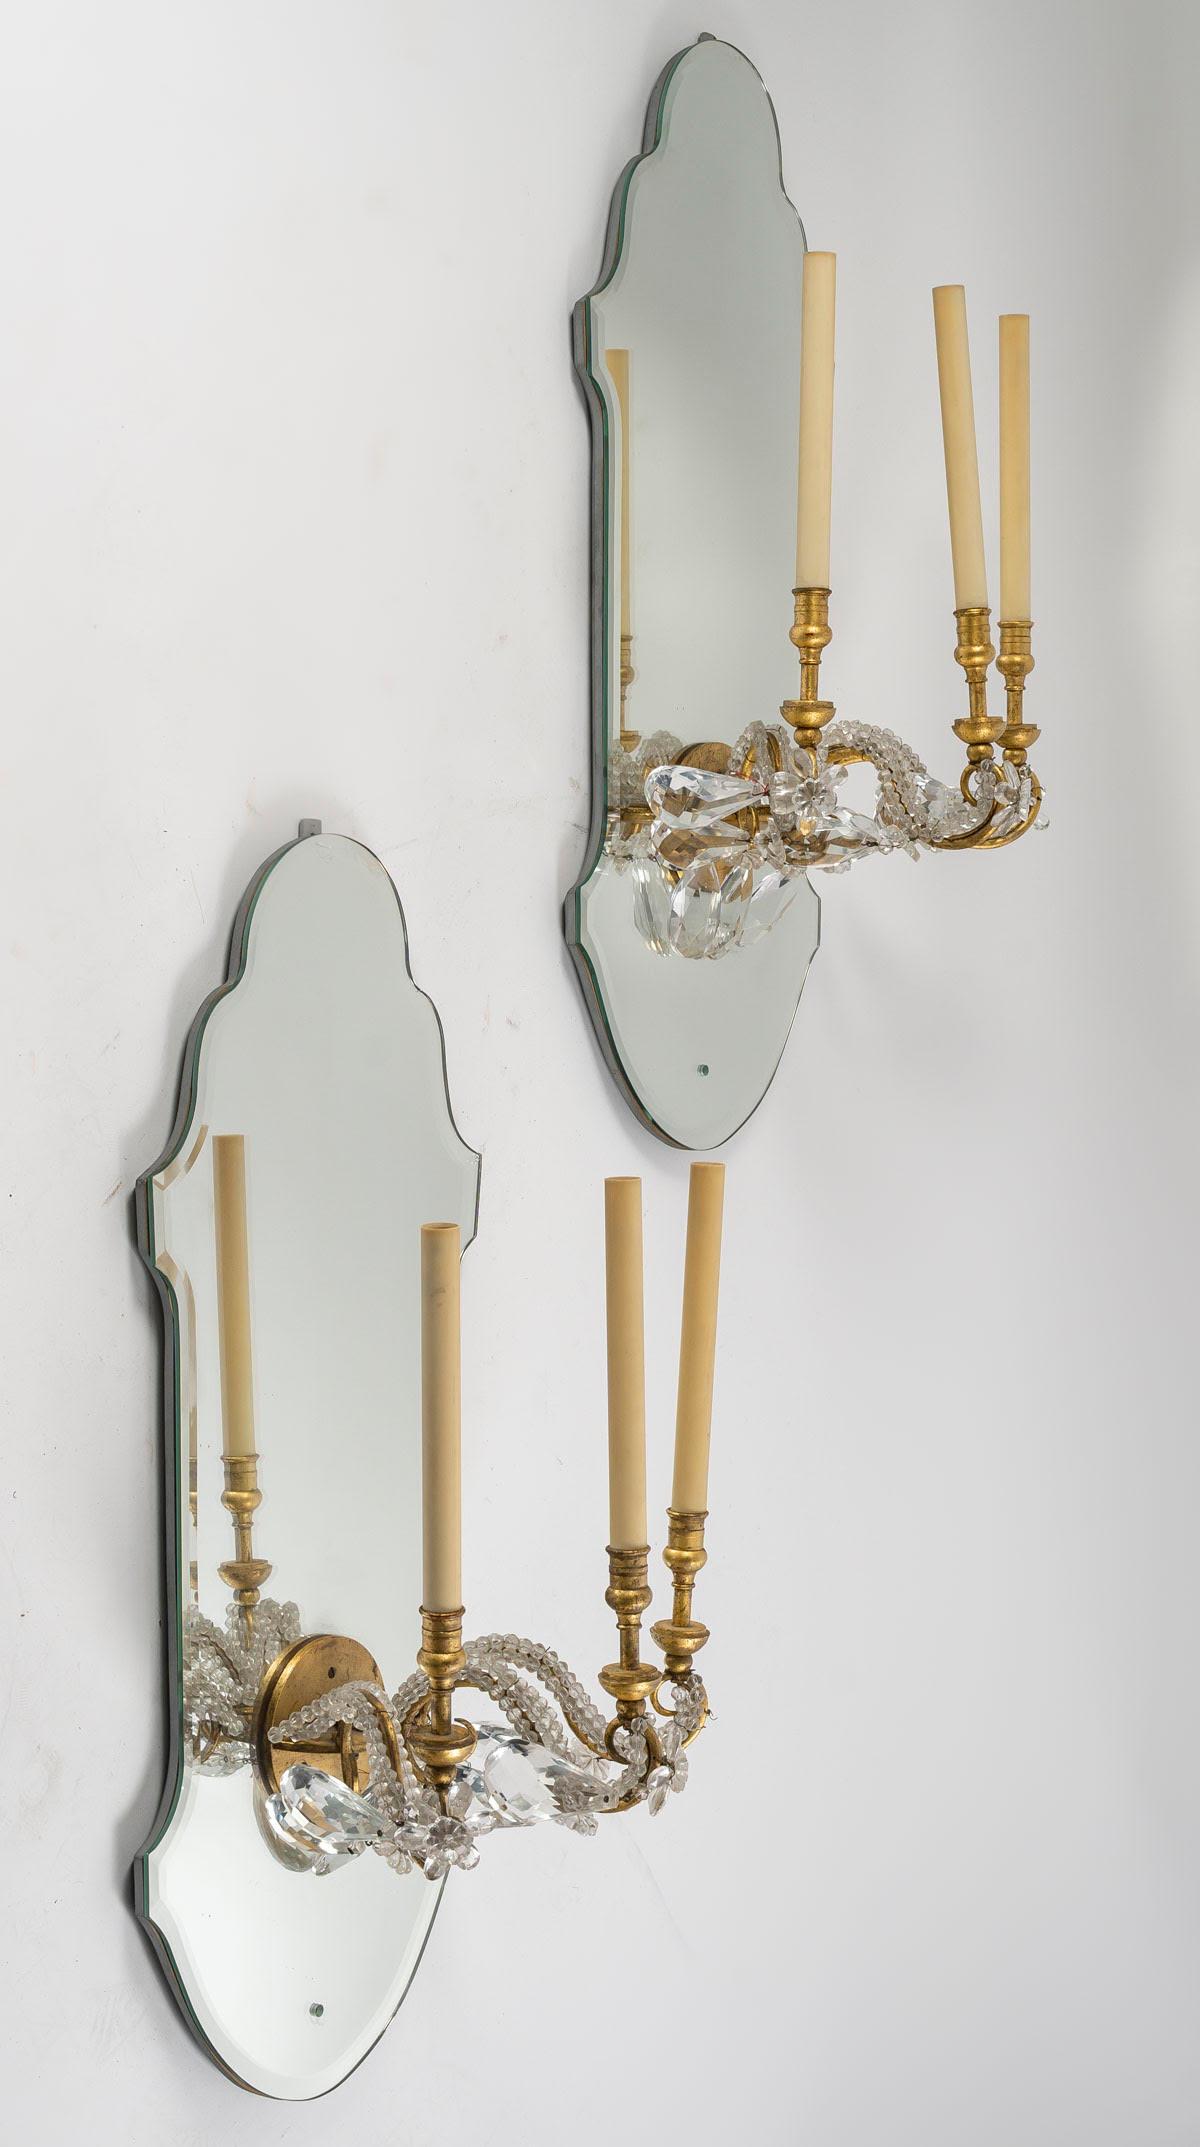 Mid-Century Modern Suite of 4 Gilded Iron and Mirror Sconces with Glass Drops, 1950-1960.